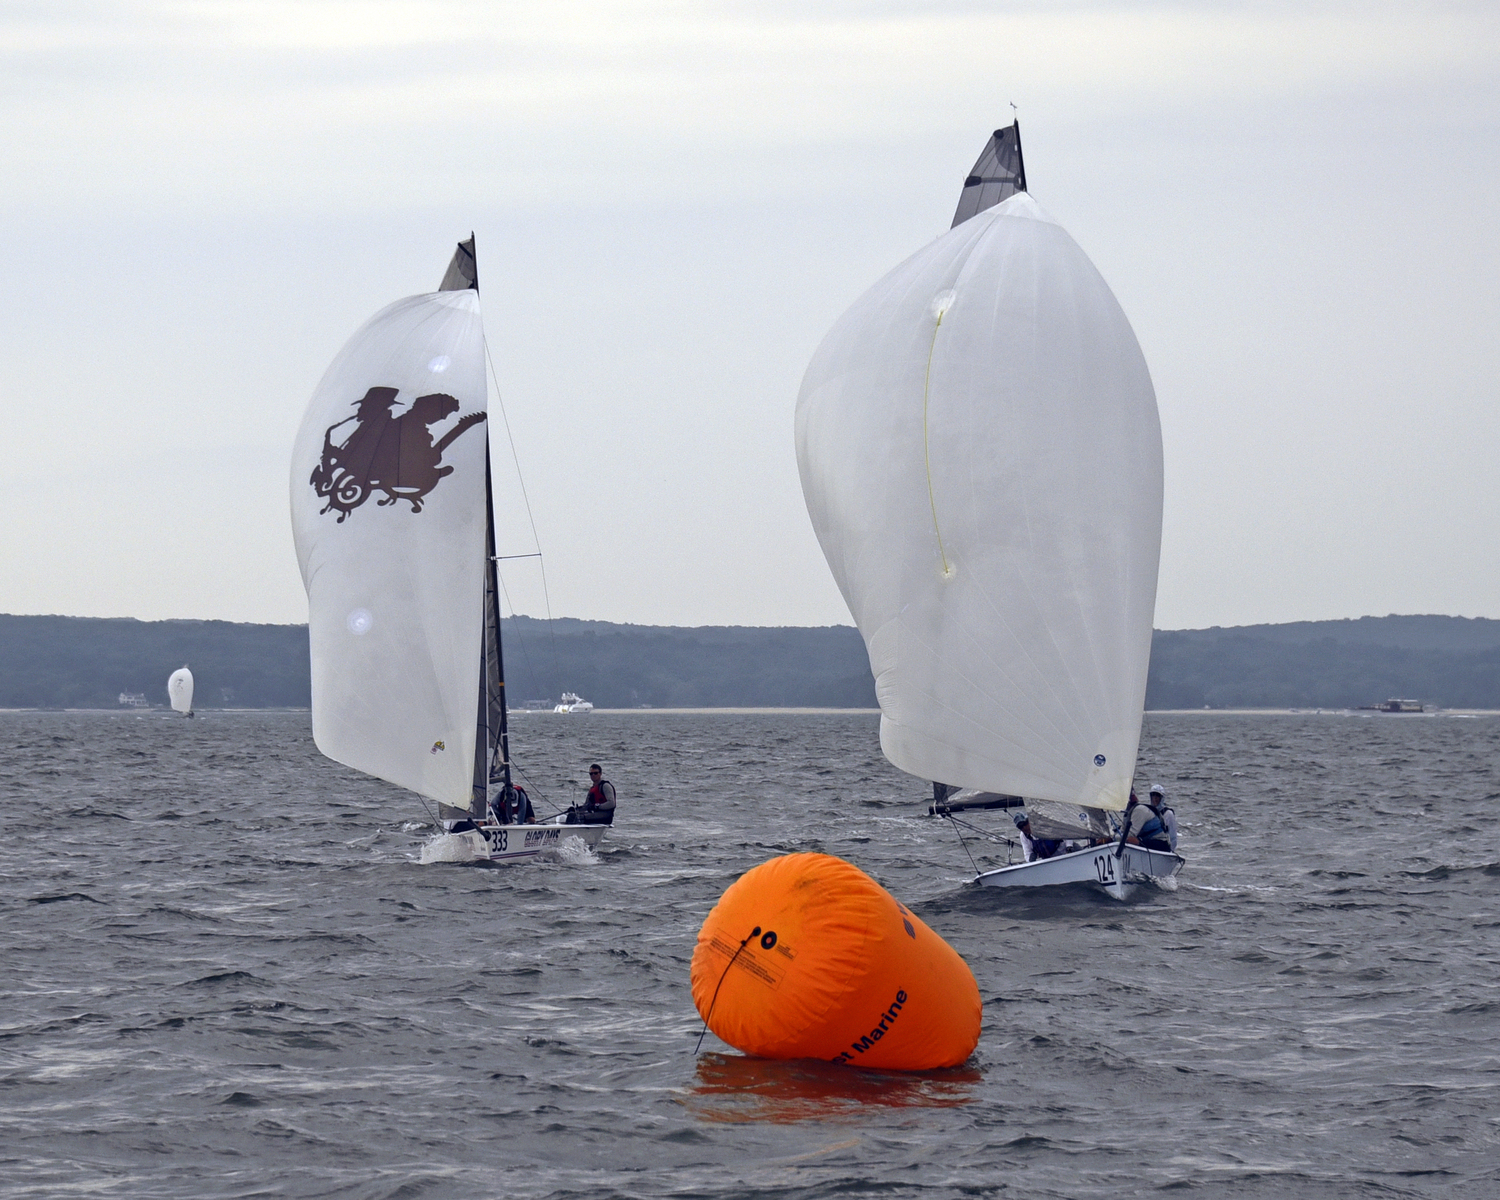 Minutes before the clouds parted and rain came down in sheets, first place in Spinnaker Division 2 Viper Glory Days, left, in a mortal duel with second place Viper Zorro.   MICHAEL MELLA